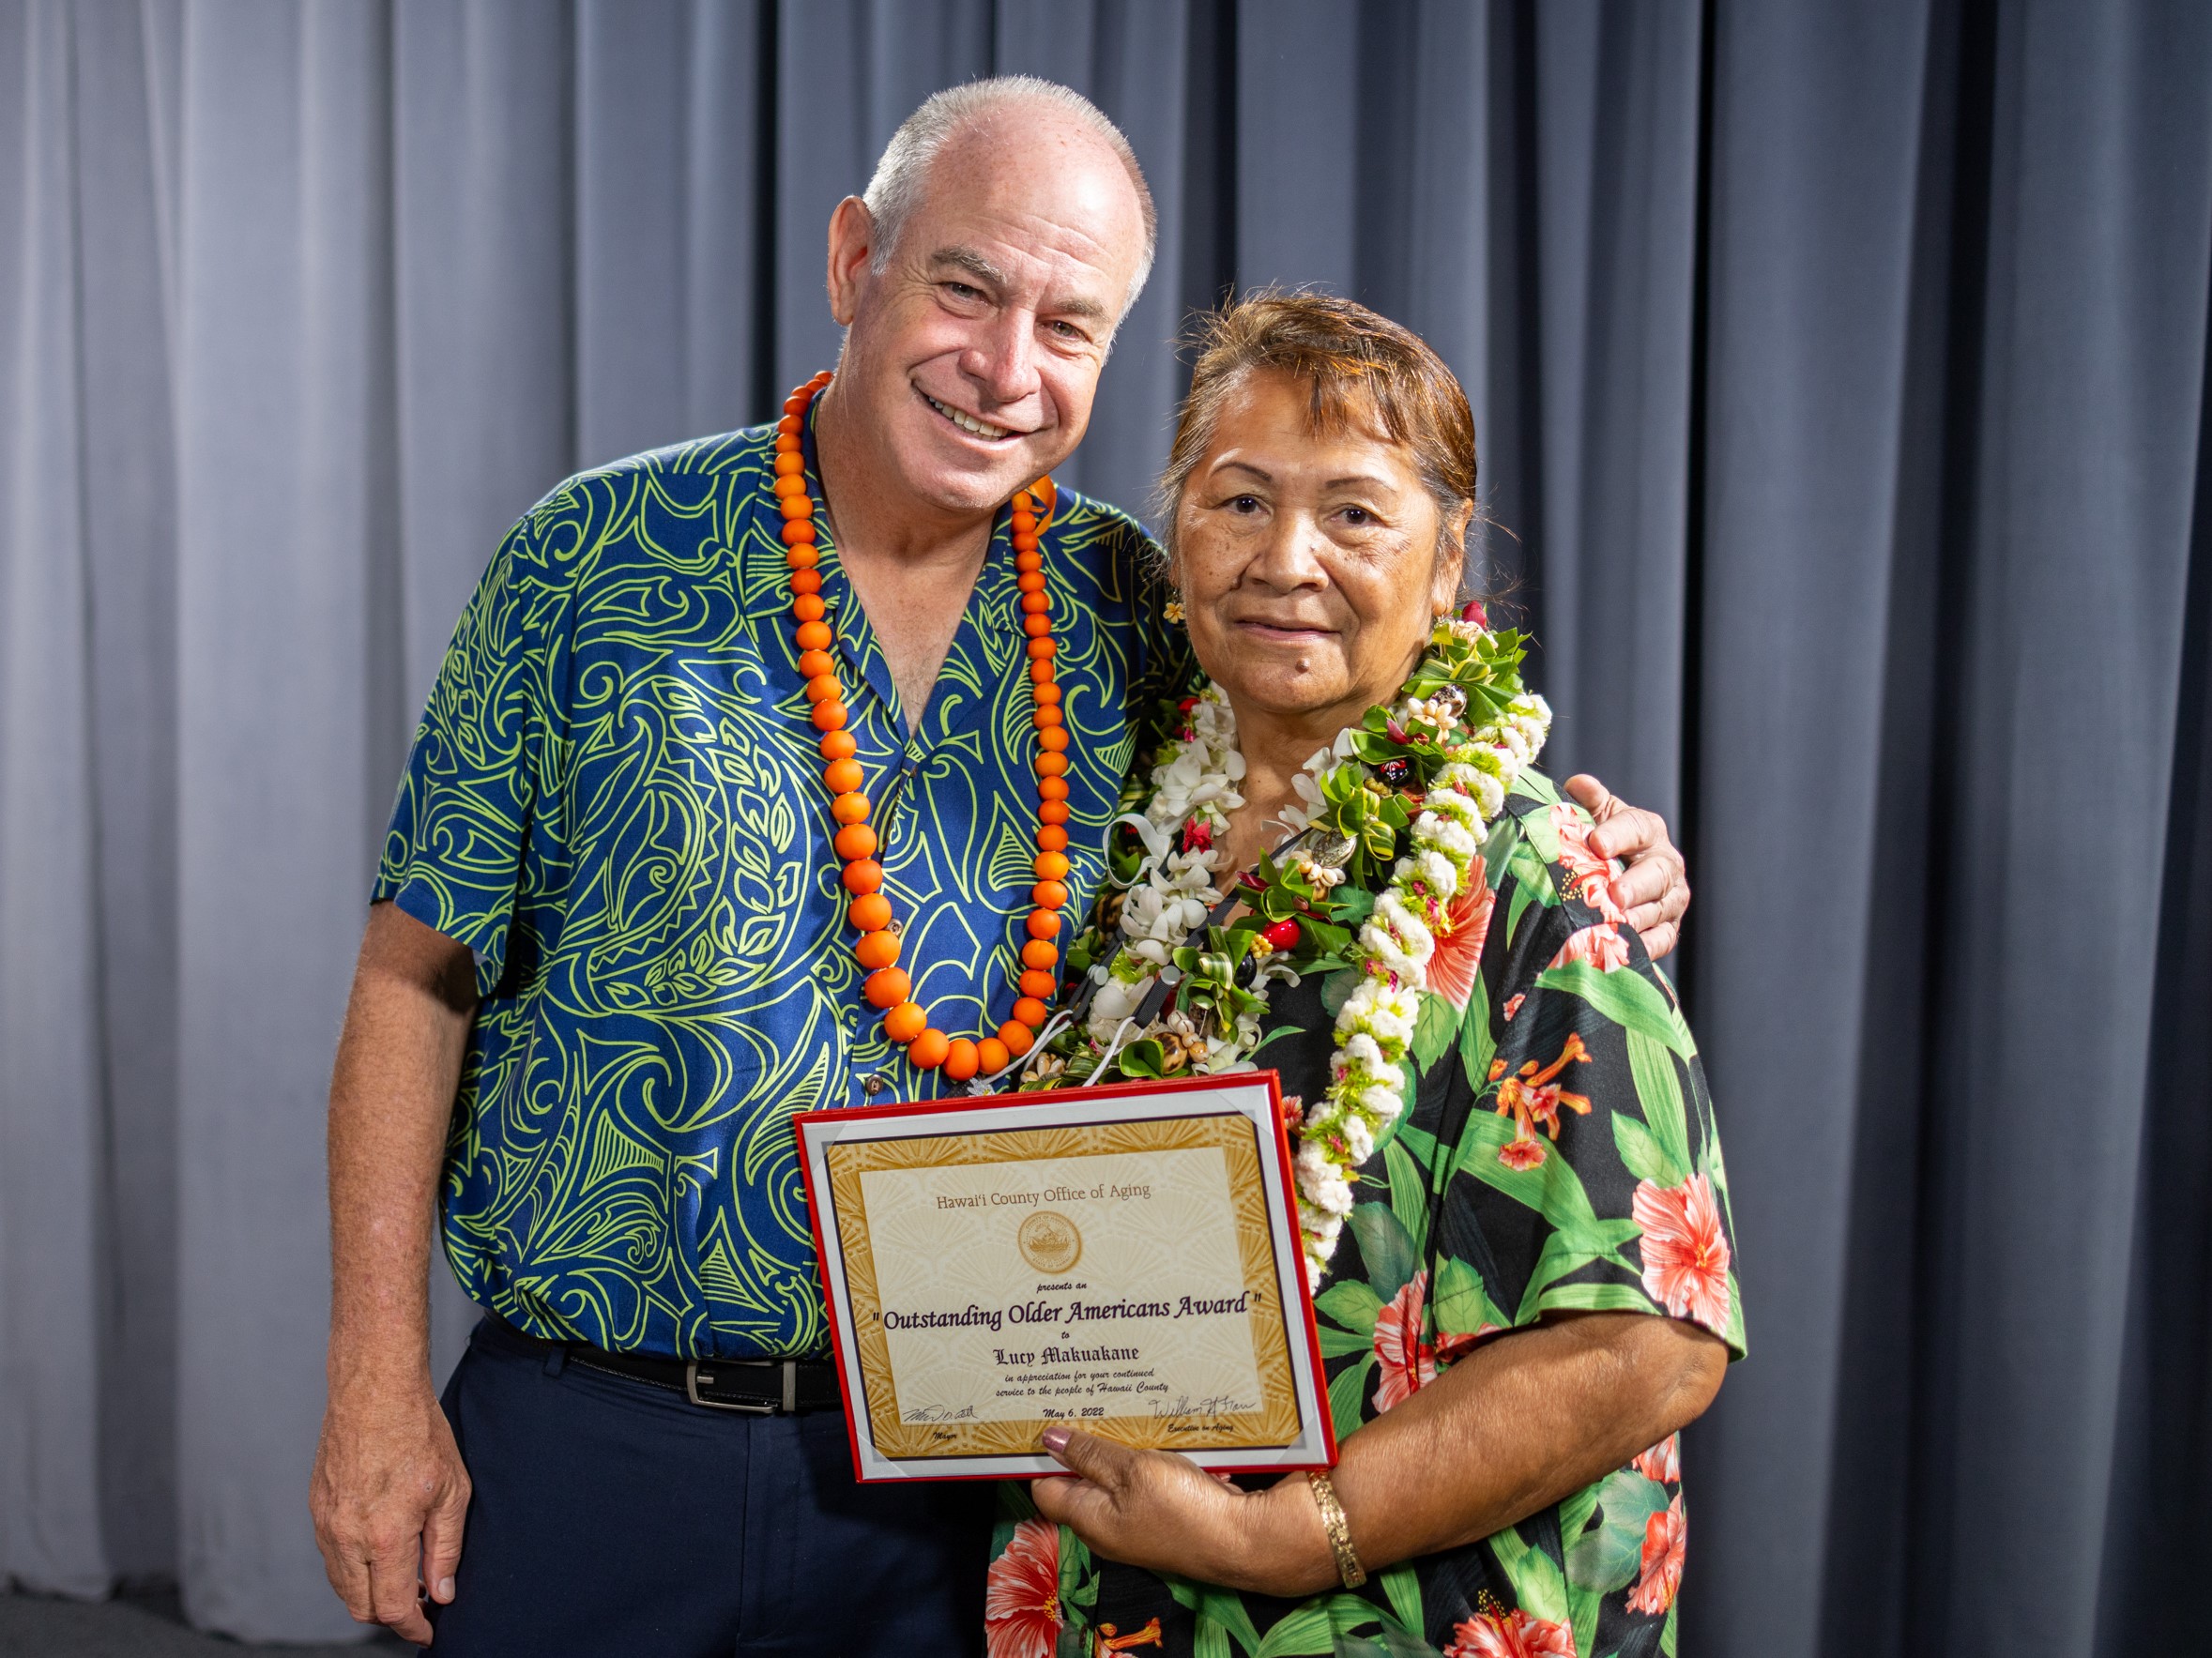 Older American Awardee Lucy Makuakane pictured with Hawai’i County Mayor Mitch Roth